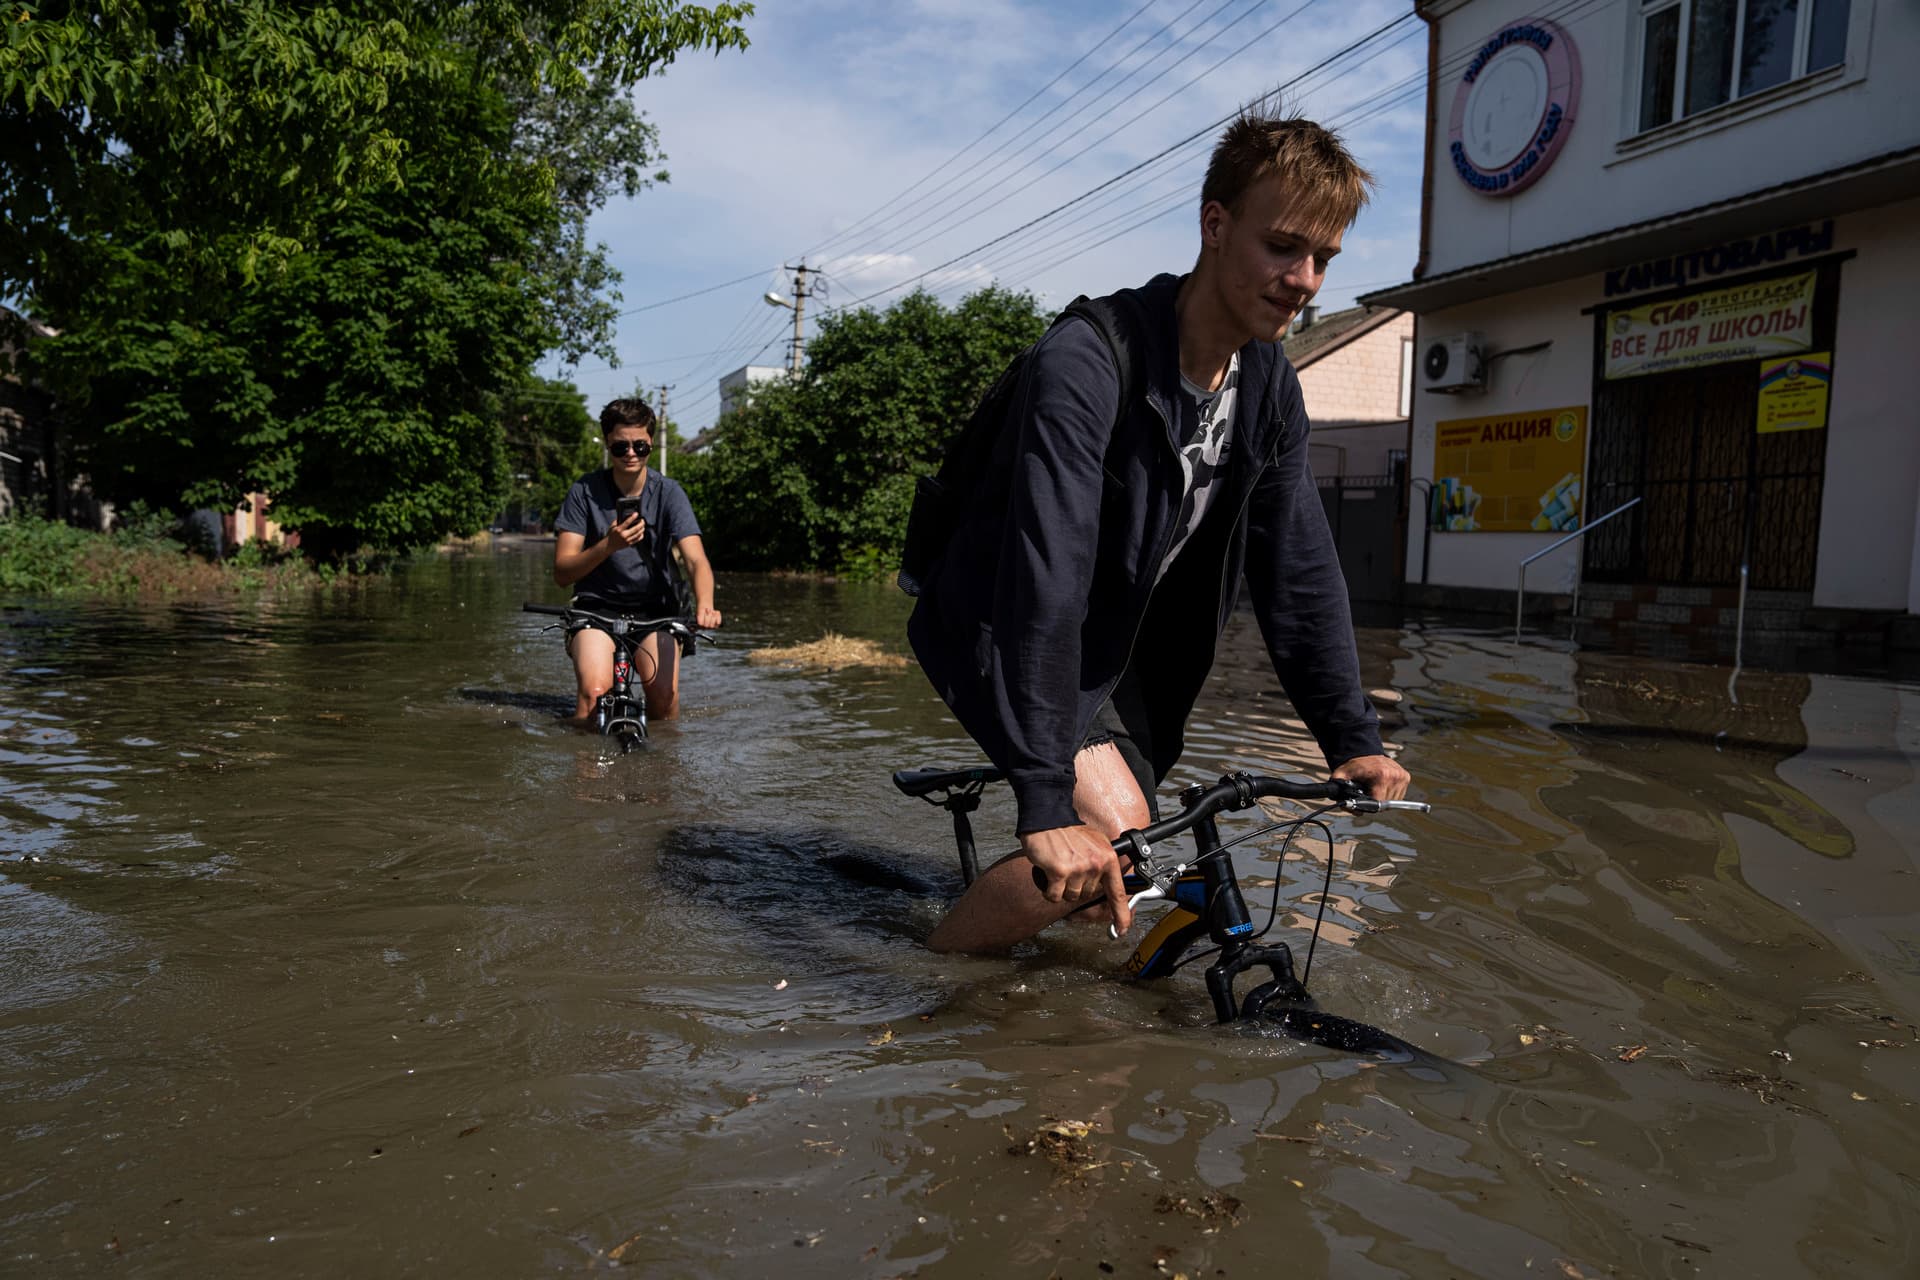 Local residents try to ride their bikes along a flooded road after the Kakhovka dam blew overnight, in Kherson